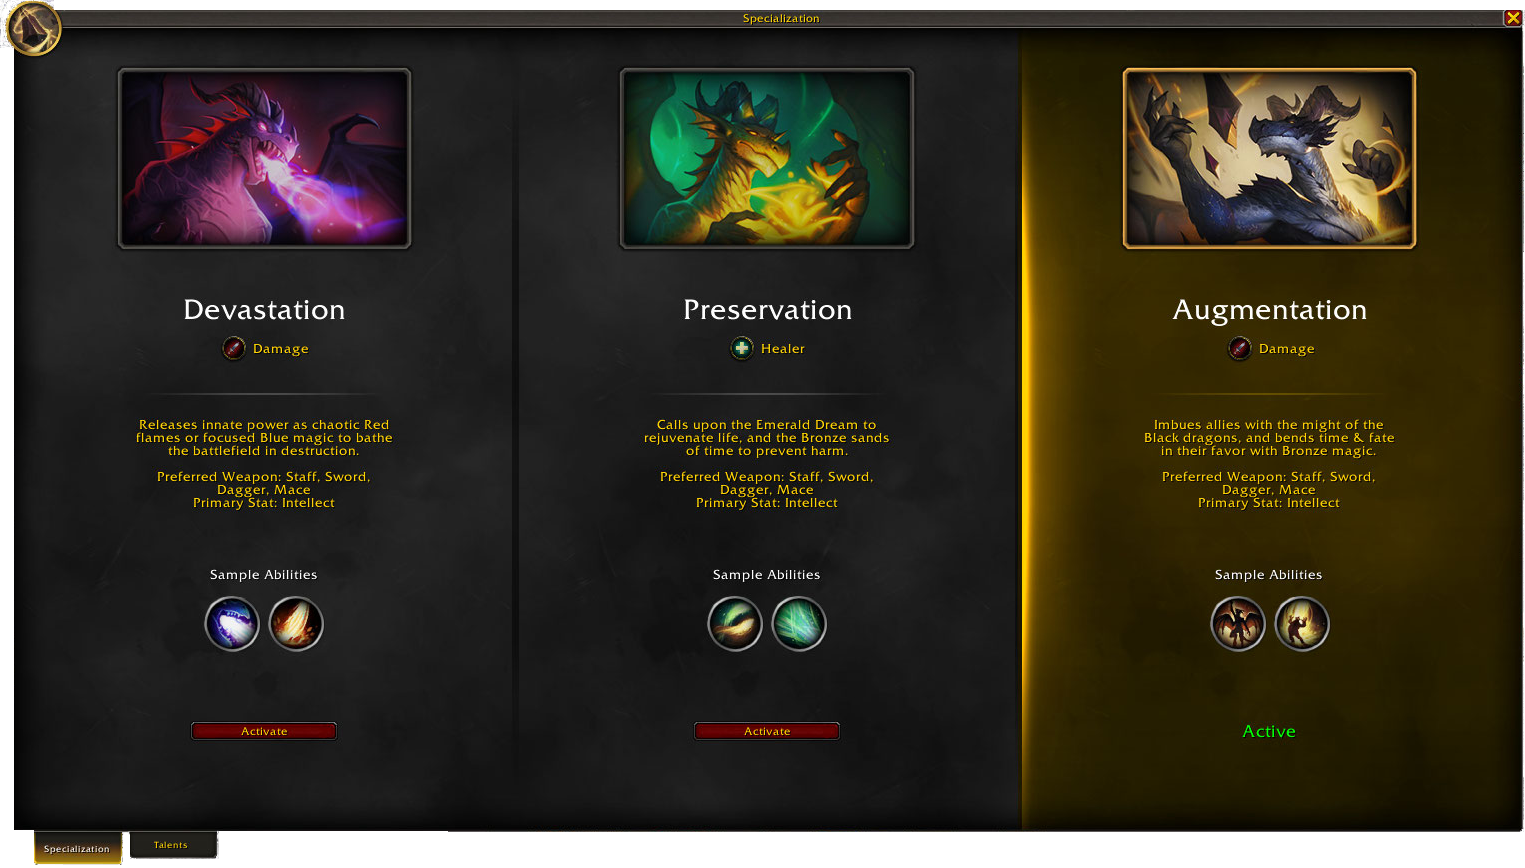 The specialization selection screen, with the new third specialization (Augmentation) highlighted.